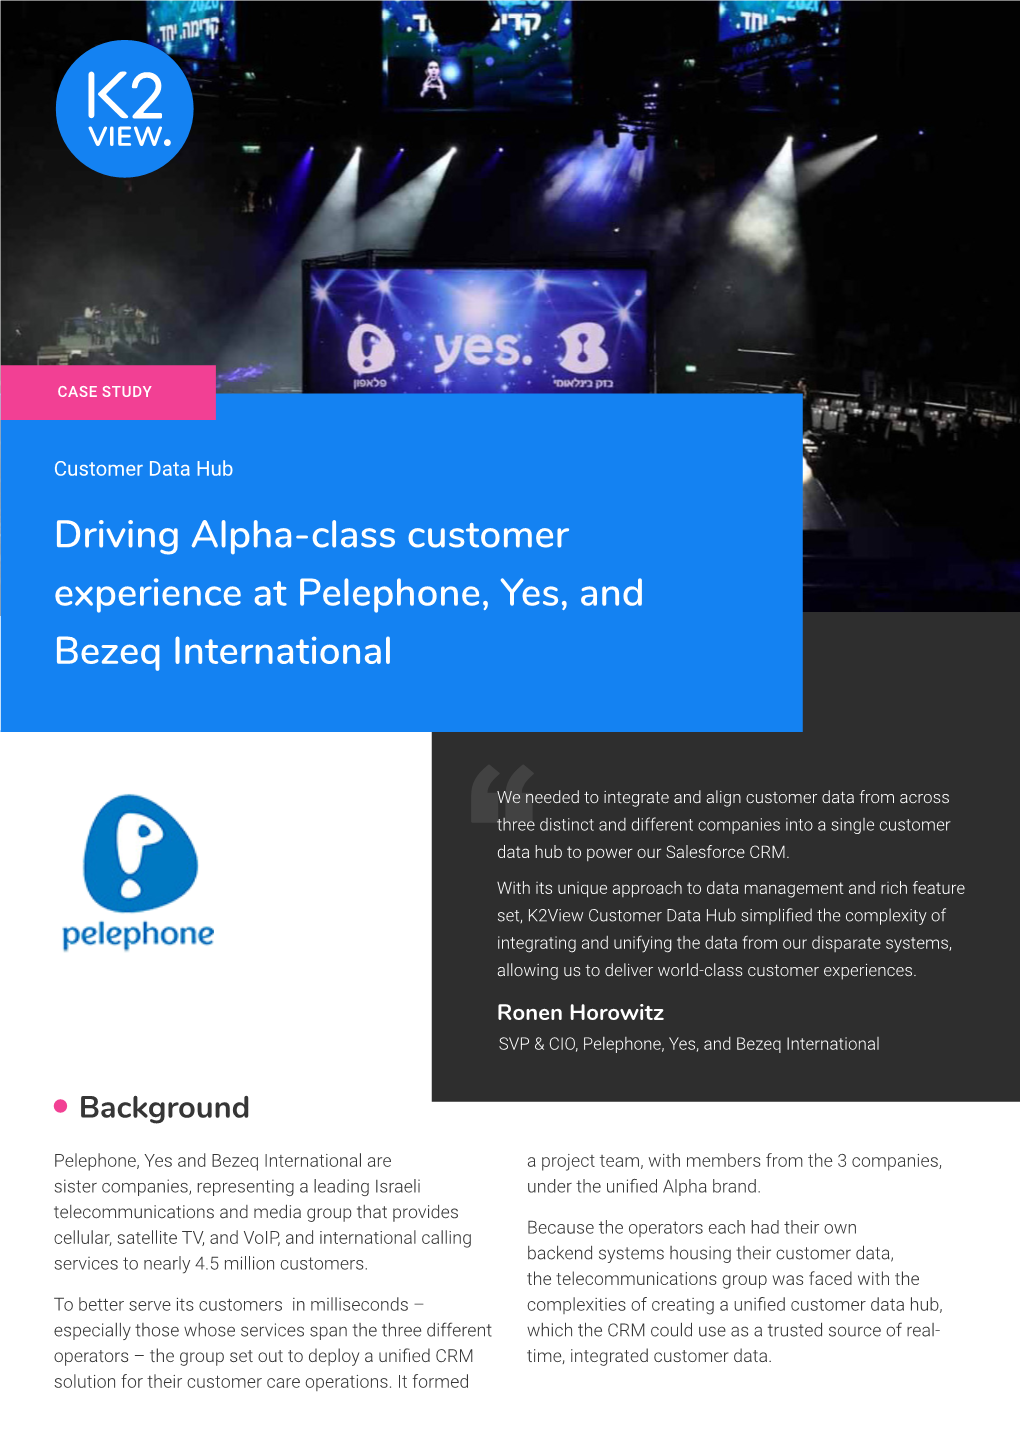 Driving Alpha-Class Customer Experience at Pelephone, Yes, and Bezeq International